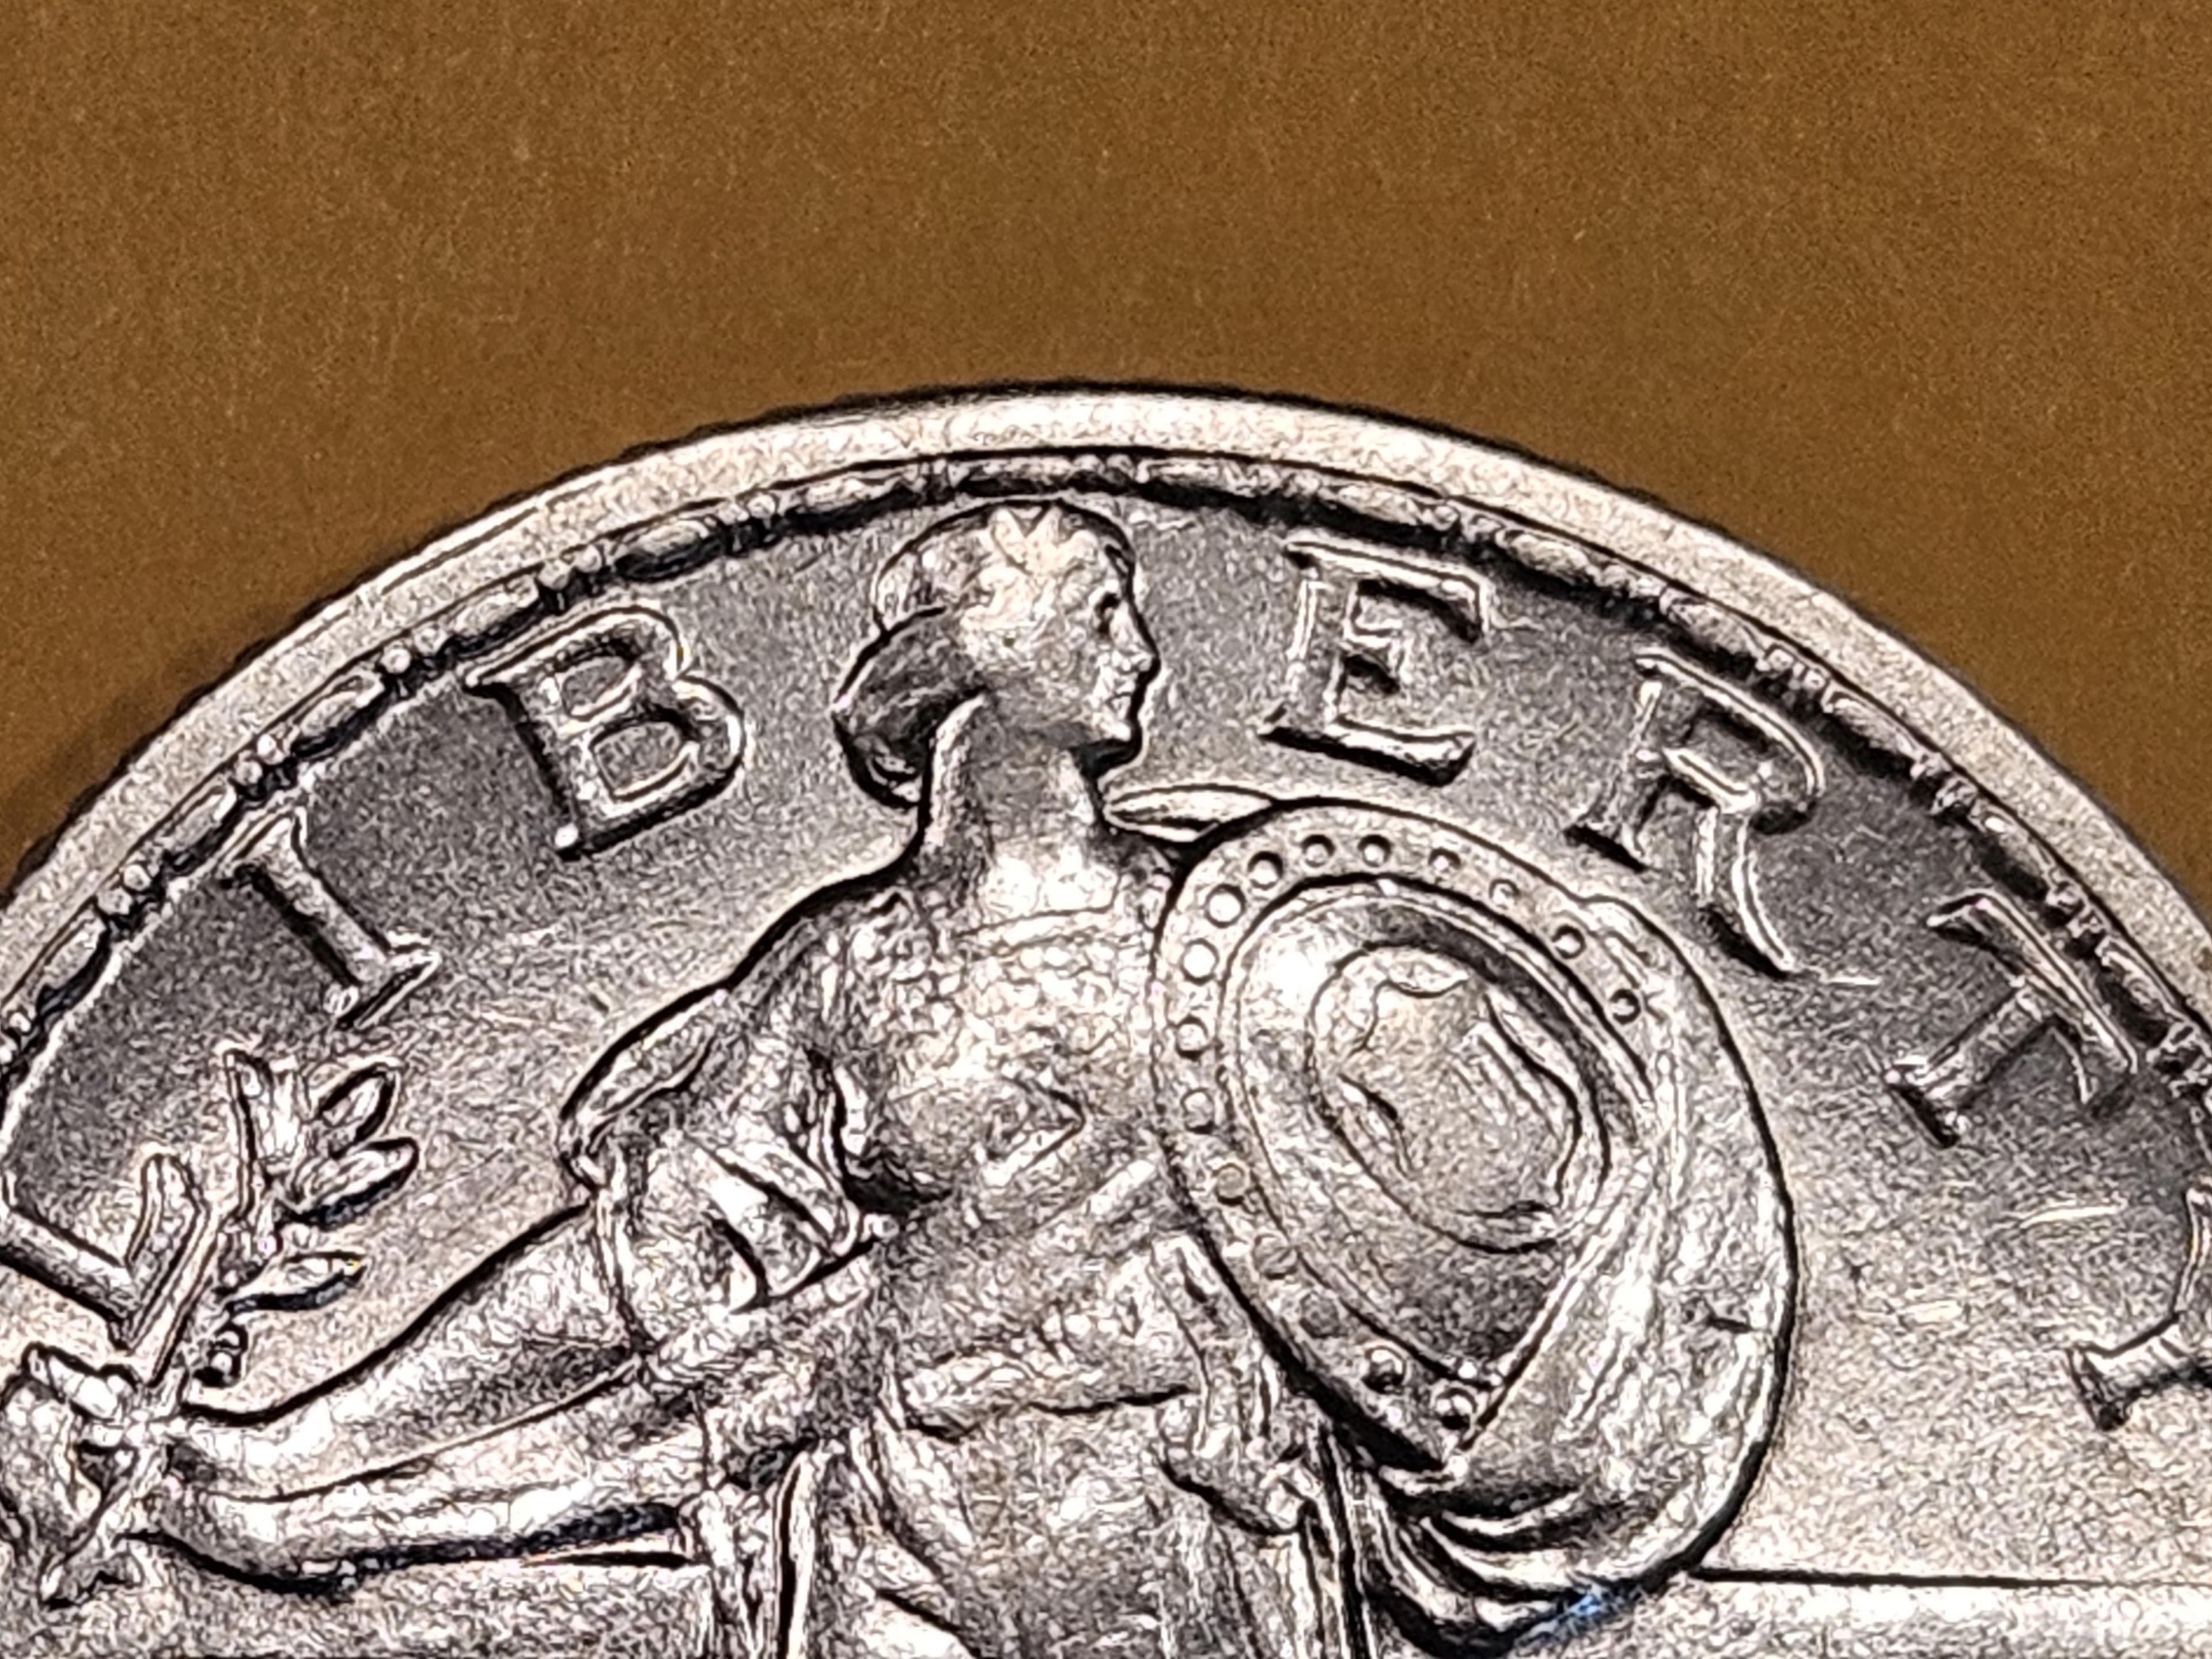 Brilliant About Uncirculated ++ 1917 Type 1 Standing Liberty Quarter